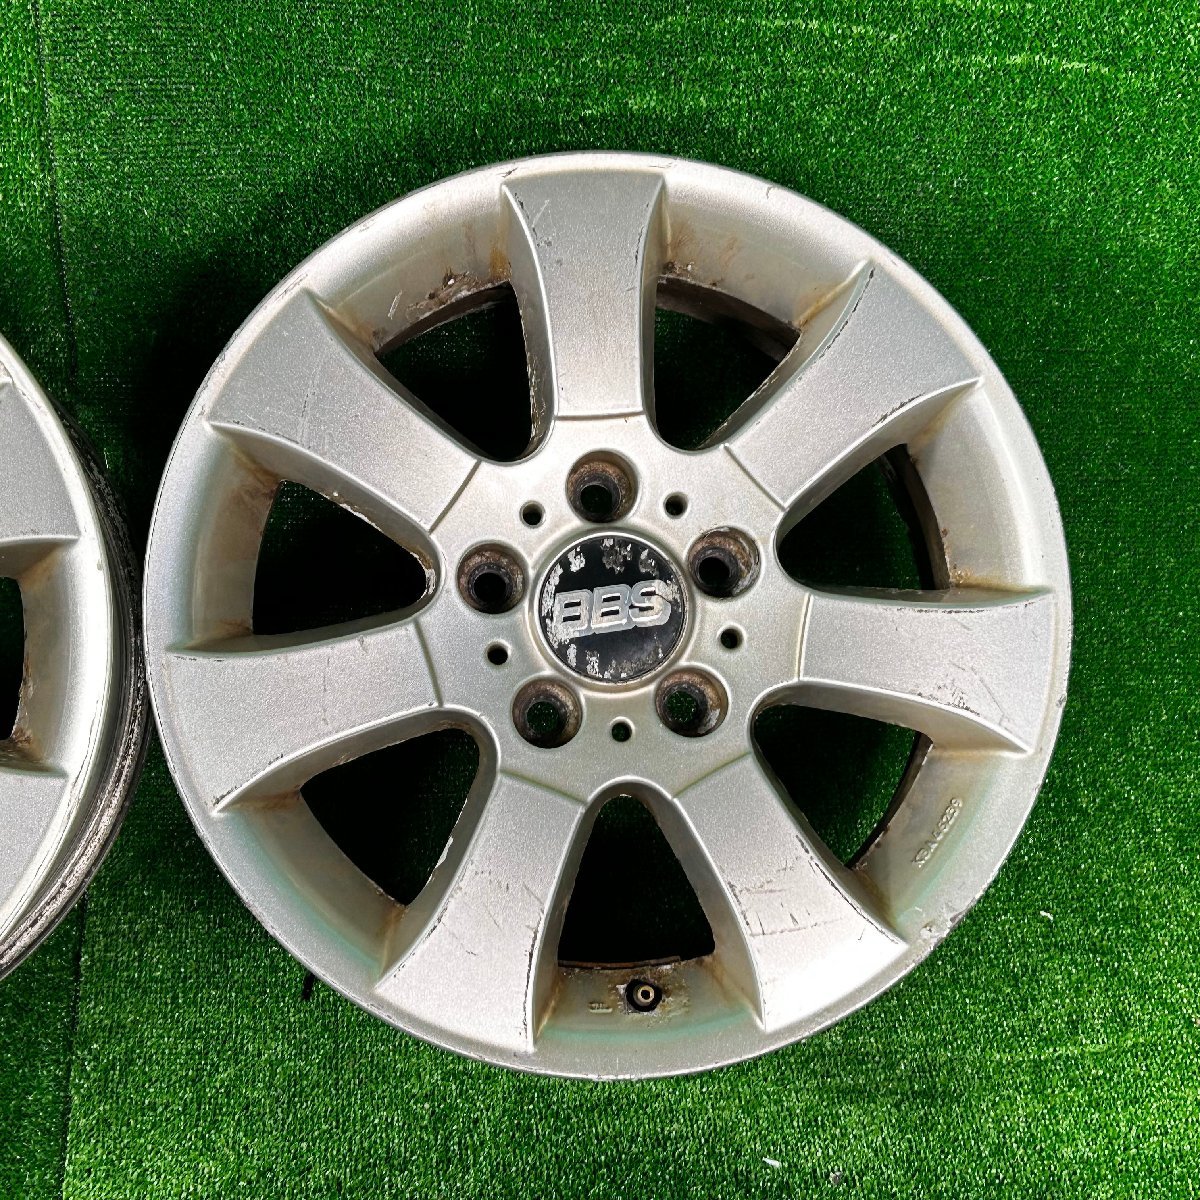 16×7j 5h ＋34 120 BBS RD 345 BMW 純正 OP 希少 オプション アルミ ホイール ホイル 16 インチ in 5穴 pcd 4本 菅16-174_画像4